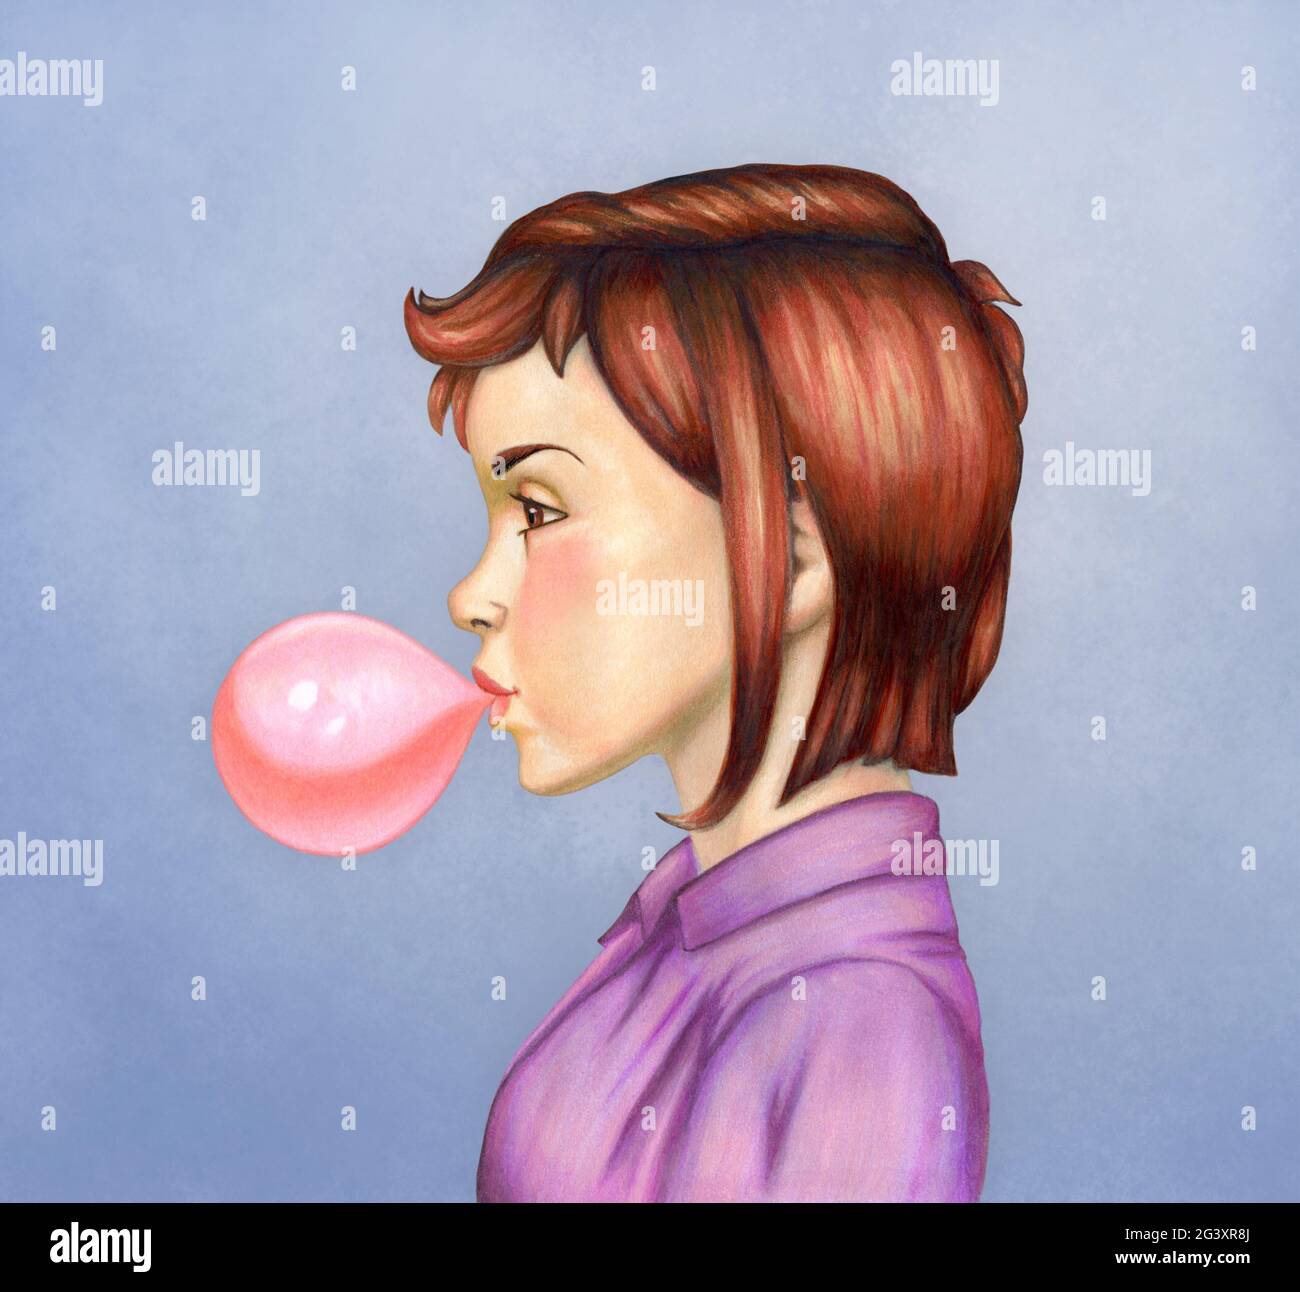 Young girl blowing bubble gum. Mixed media illustration. Stock Photo